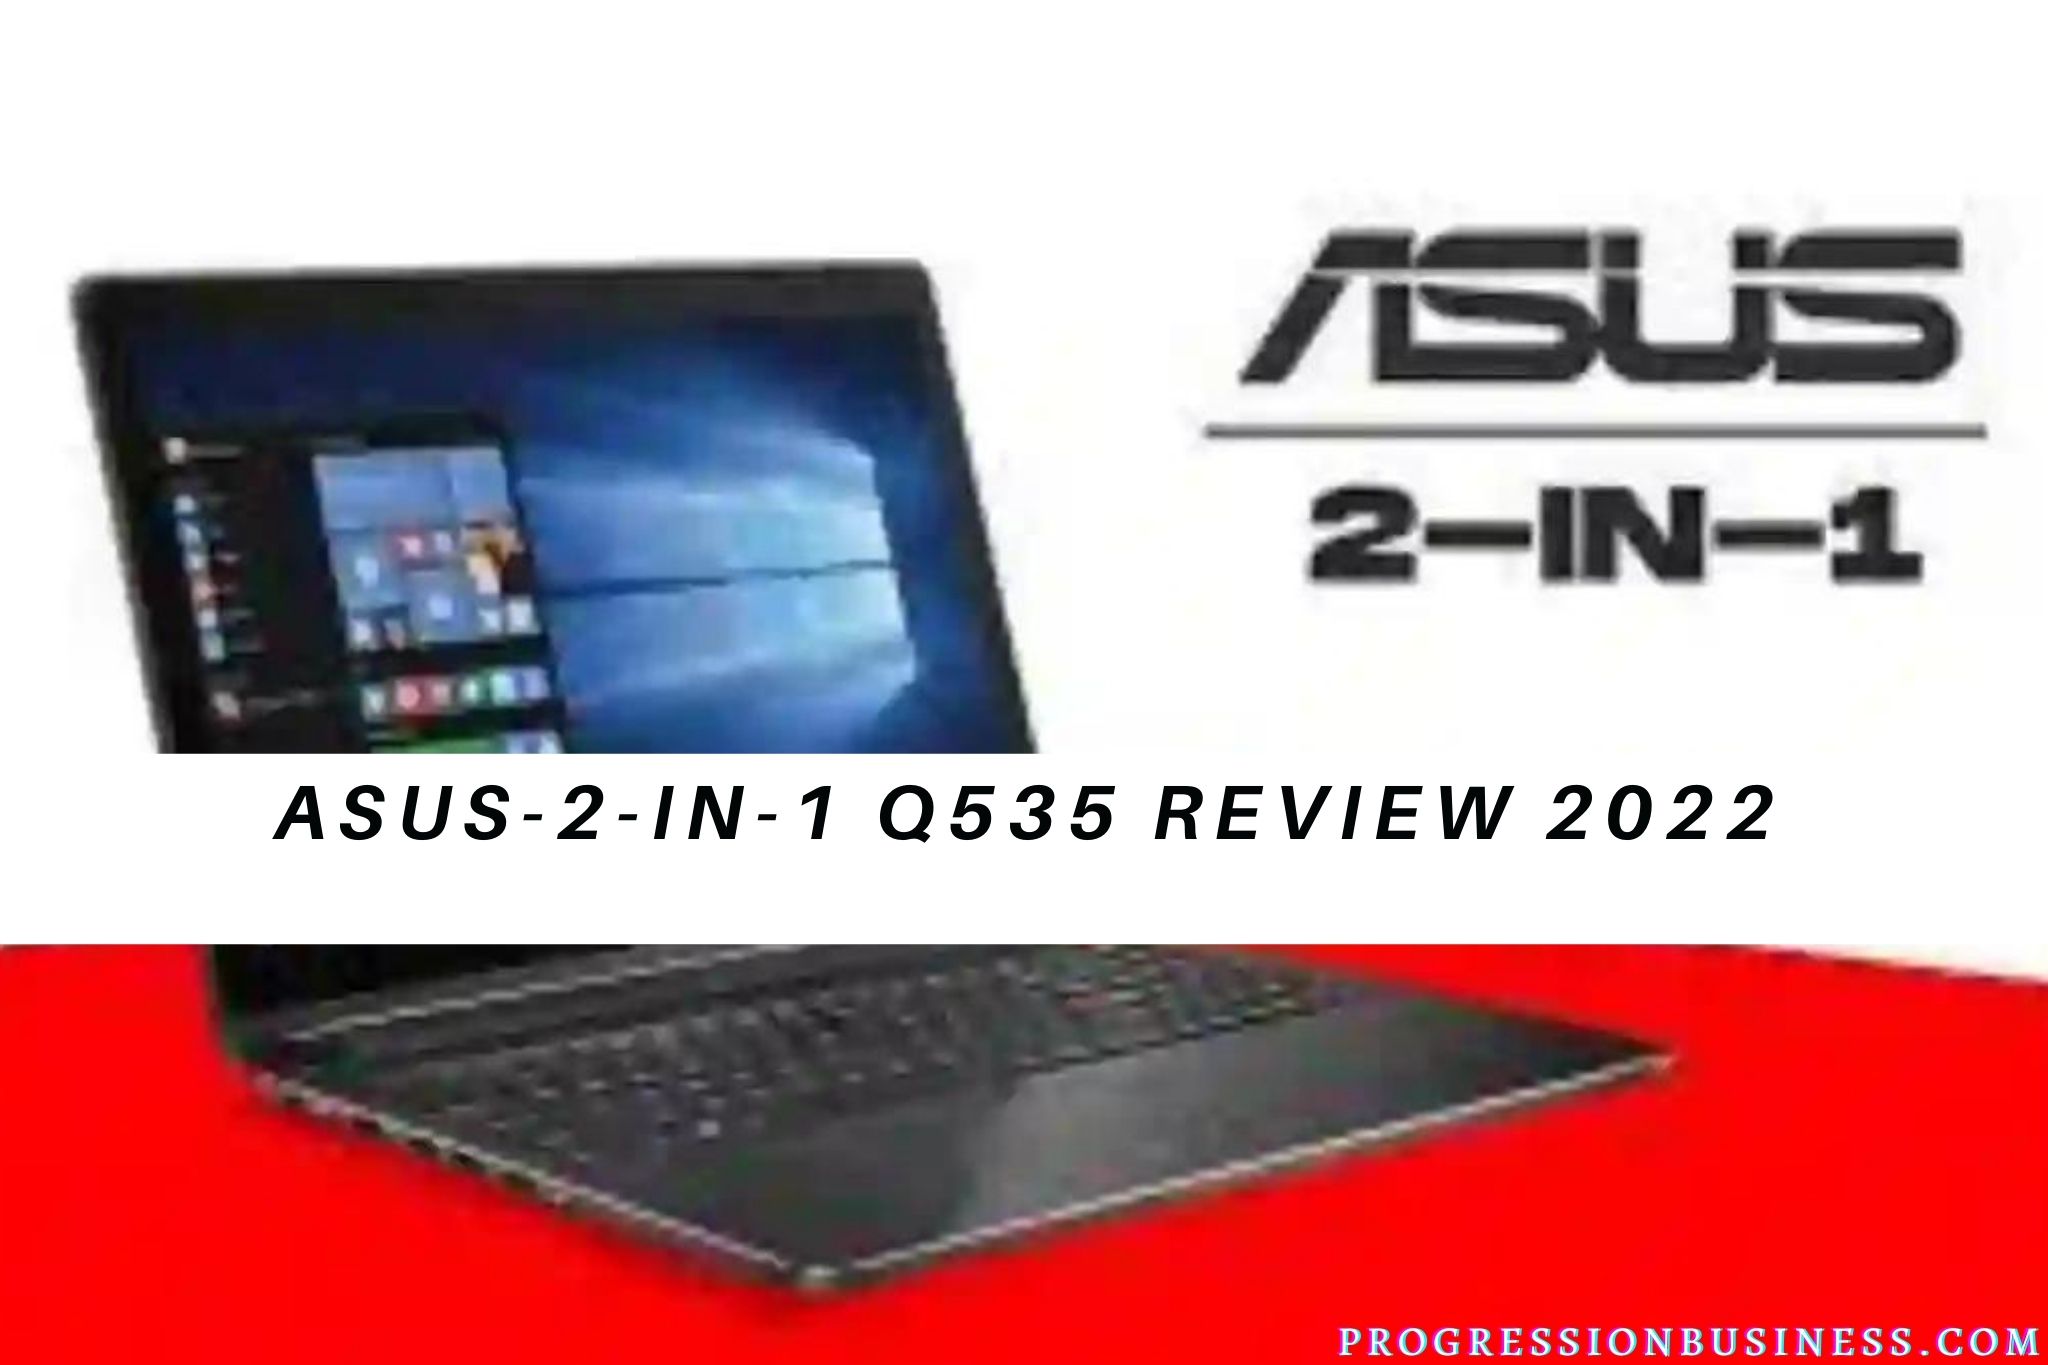 Asus-2-In-1 Q535 Review 2022